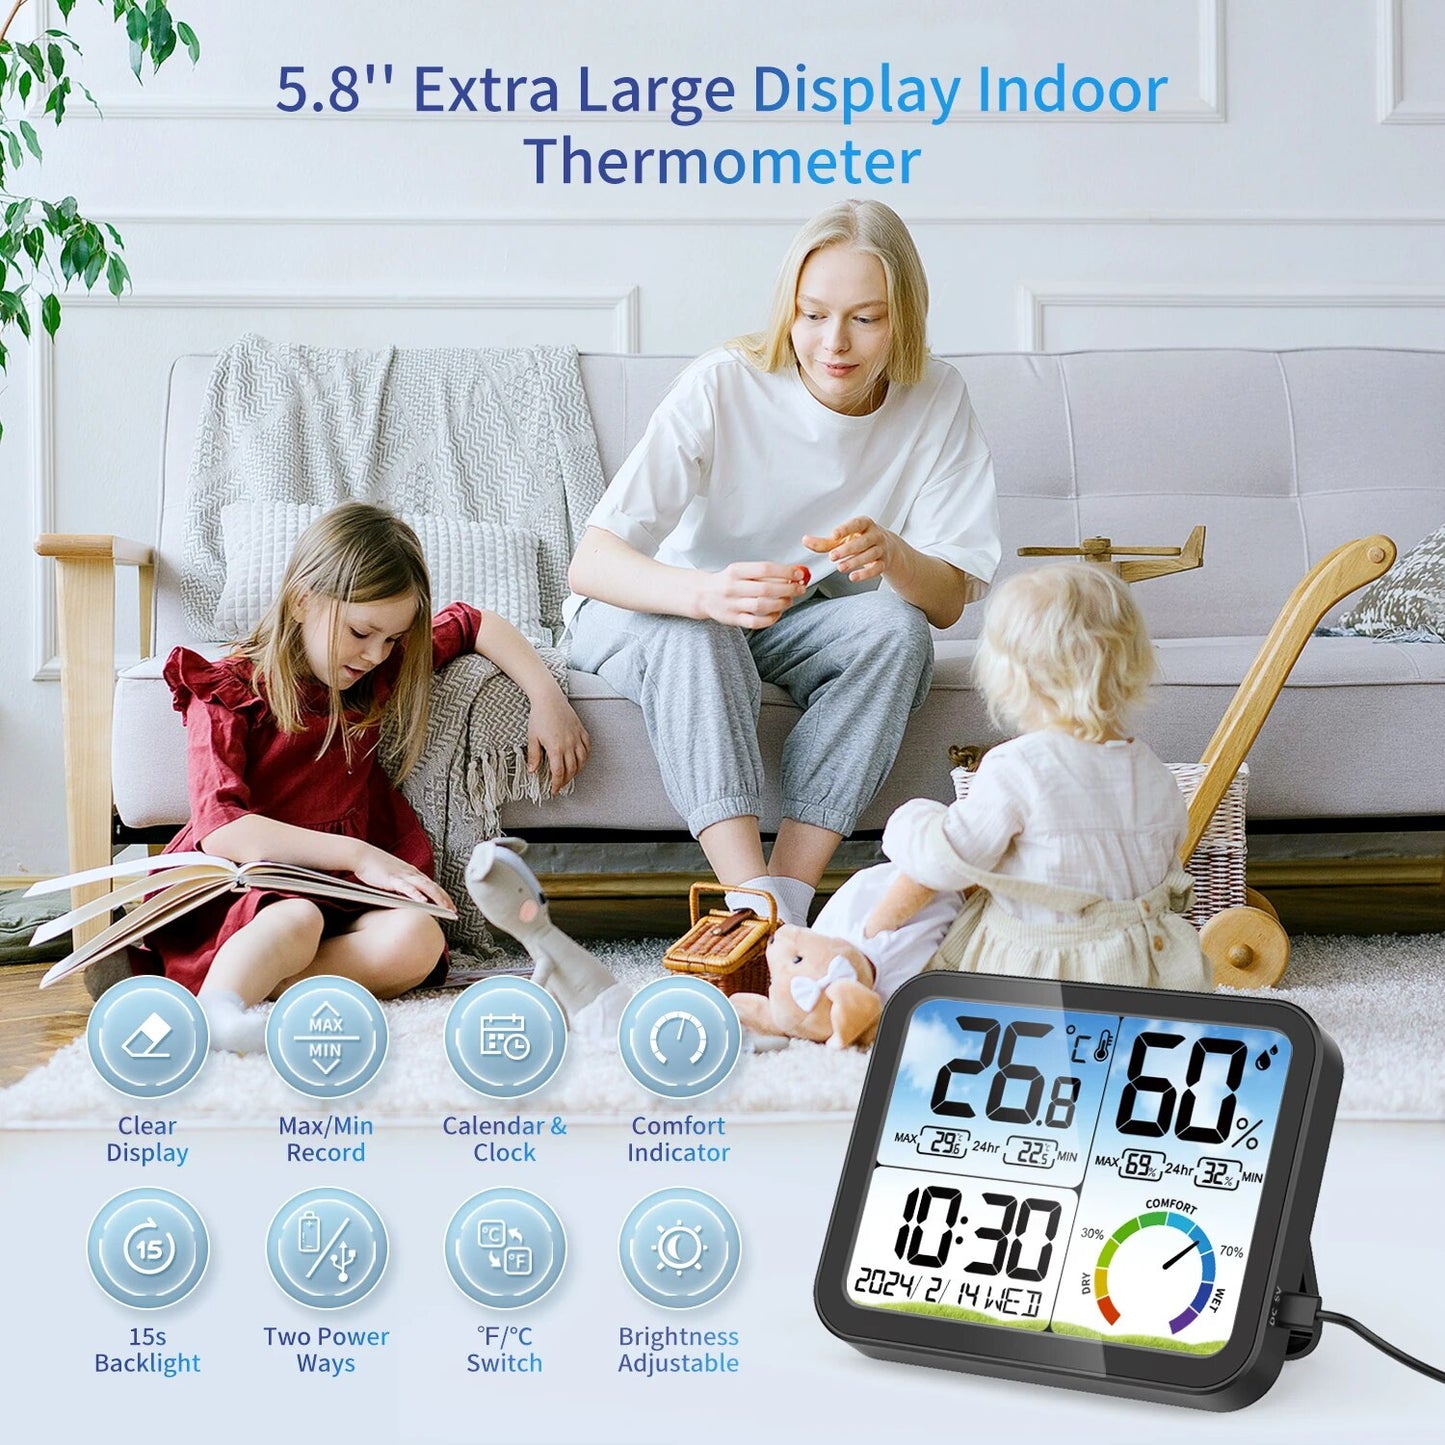 Digital Indoor Room Thermometer 5.8'' Extra Large Display Temperature Sensor with Accurate Temp Humidity Gauge Monitor